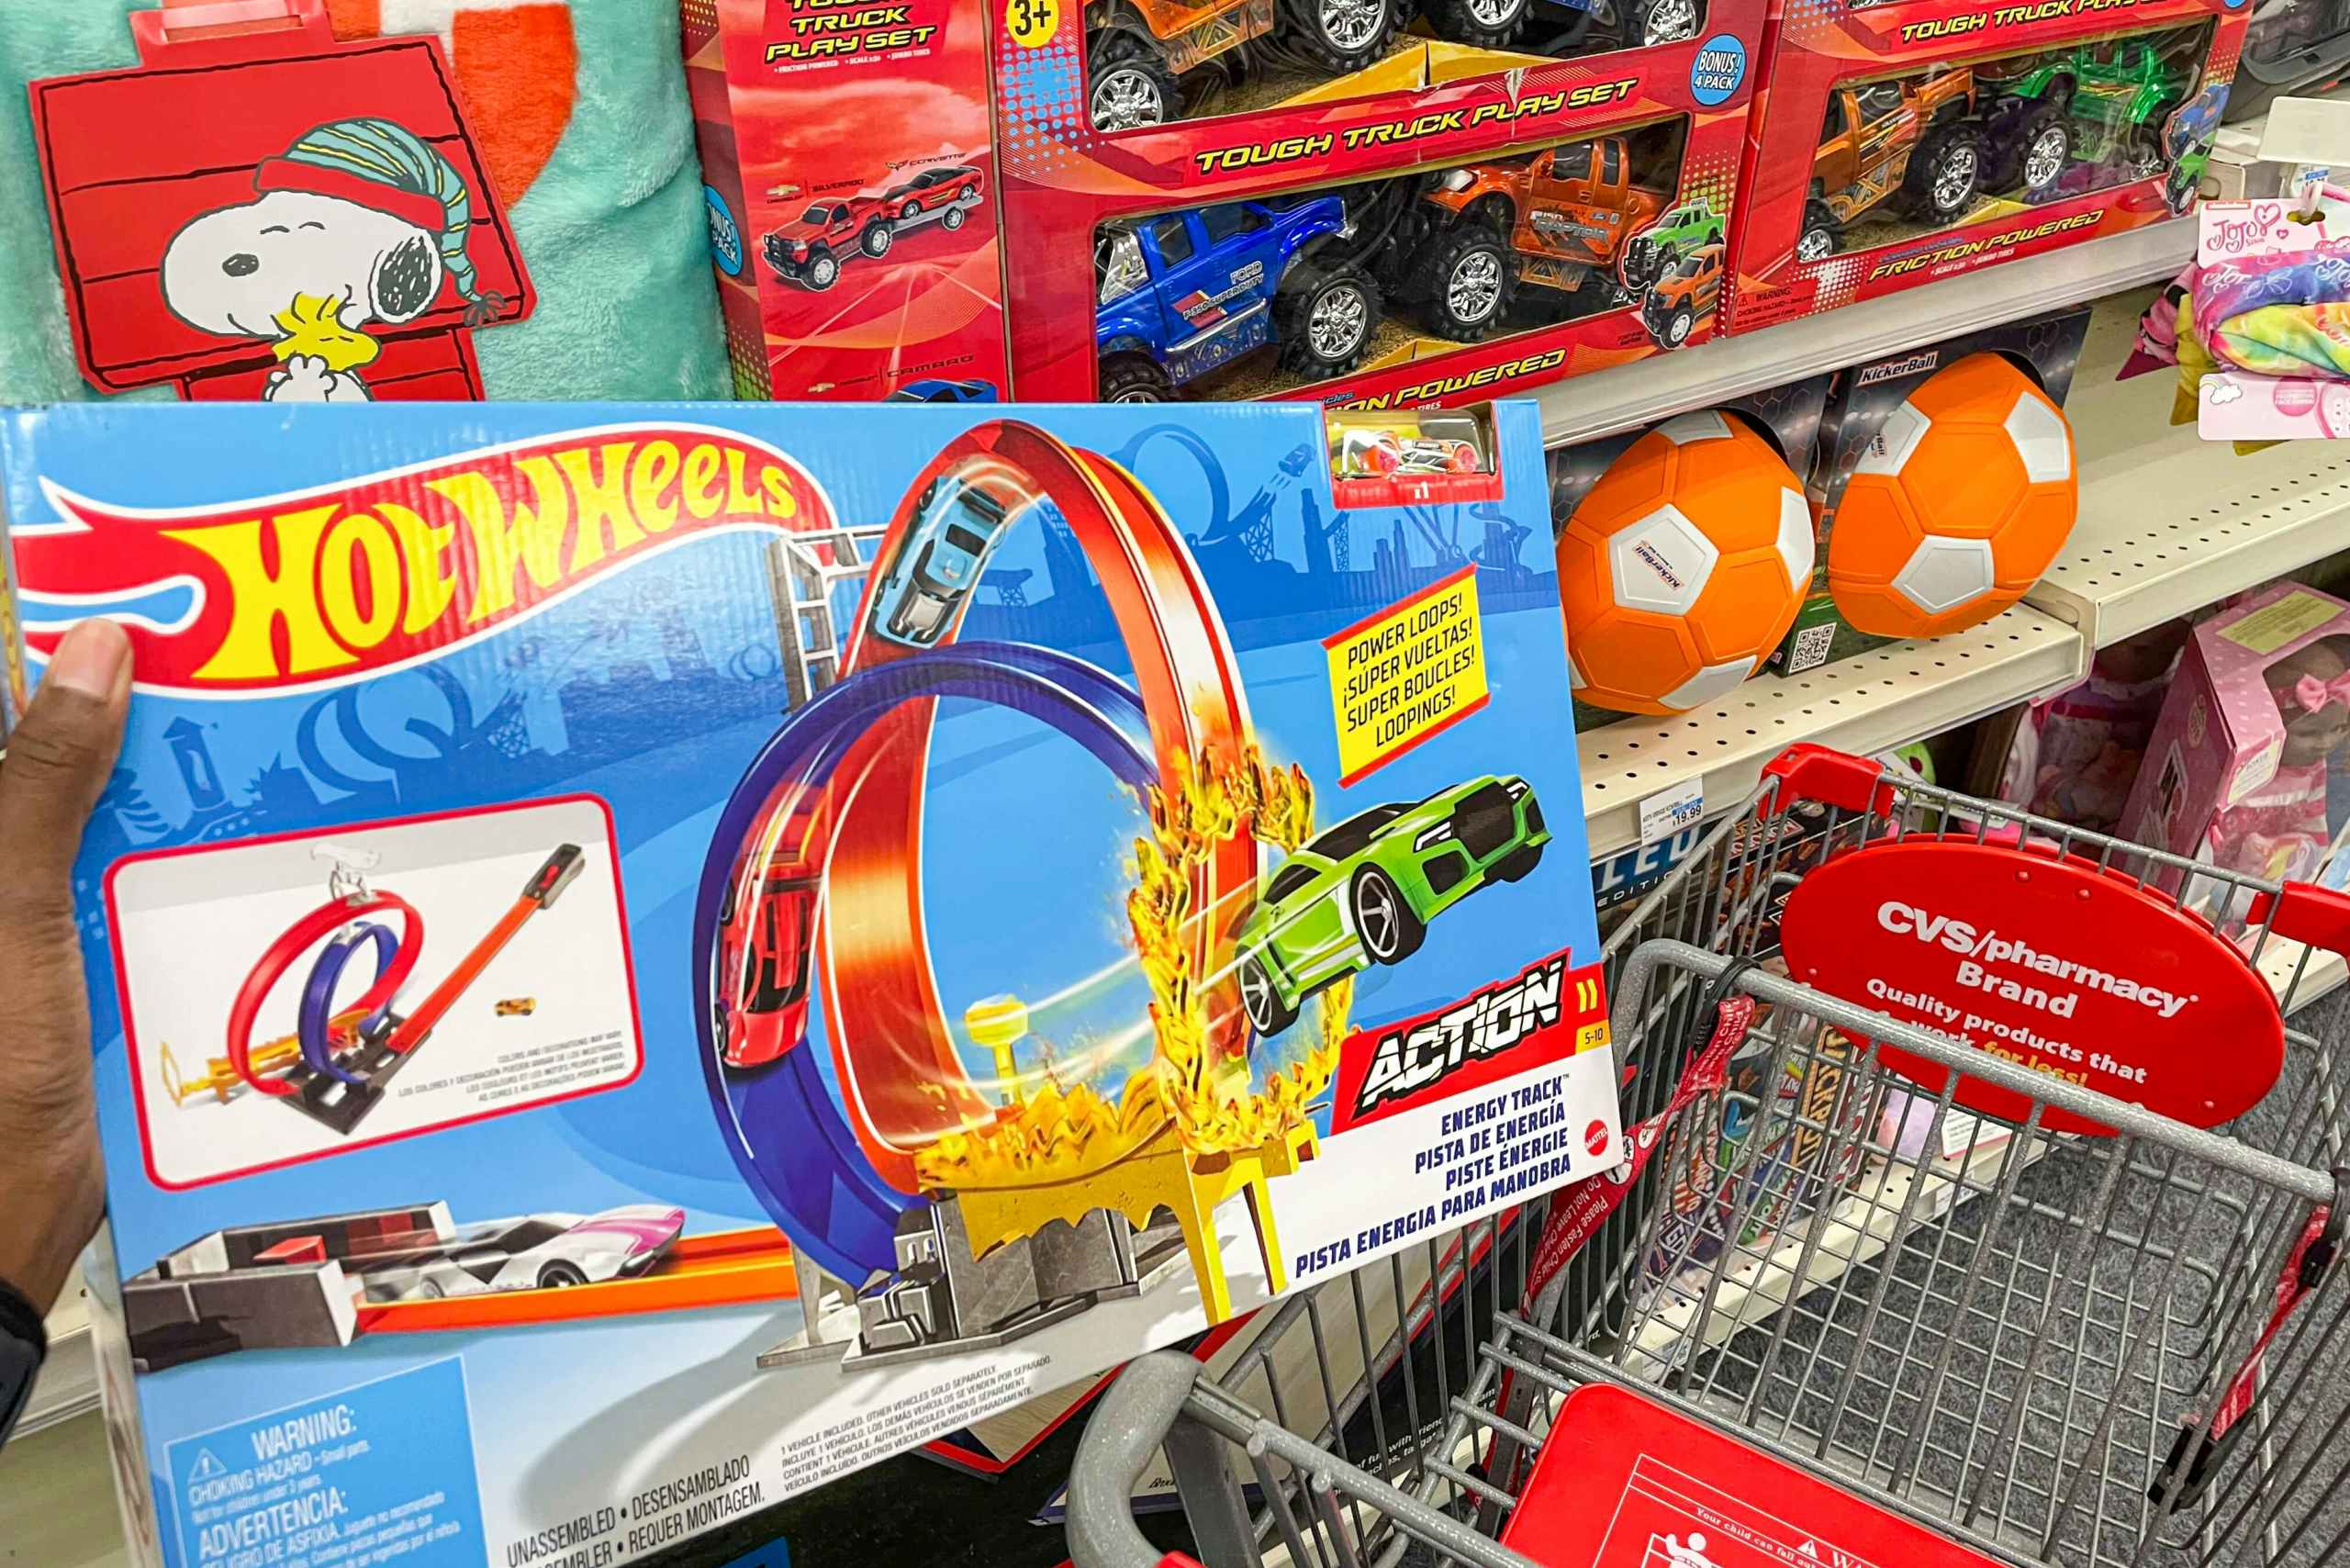 A person putting a Hot Wheels toy into a CVS shopping cart during a Black Friday event.